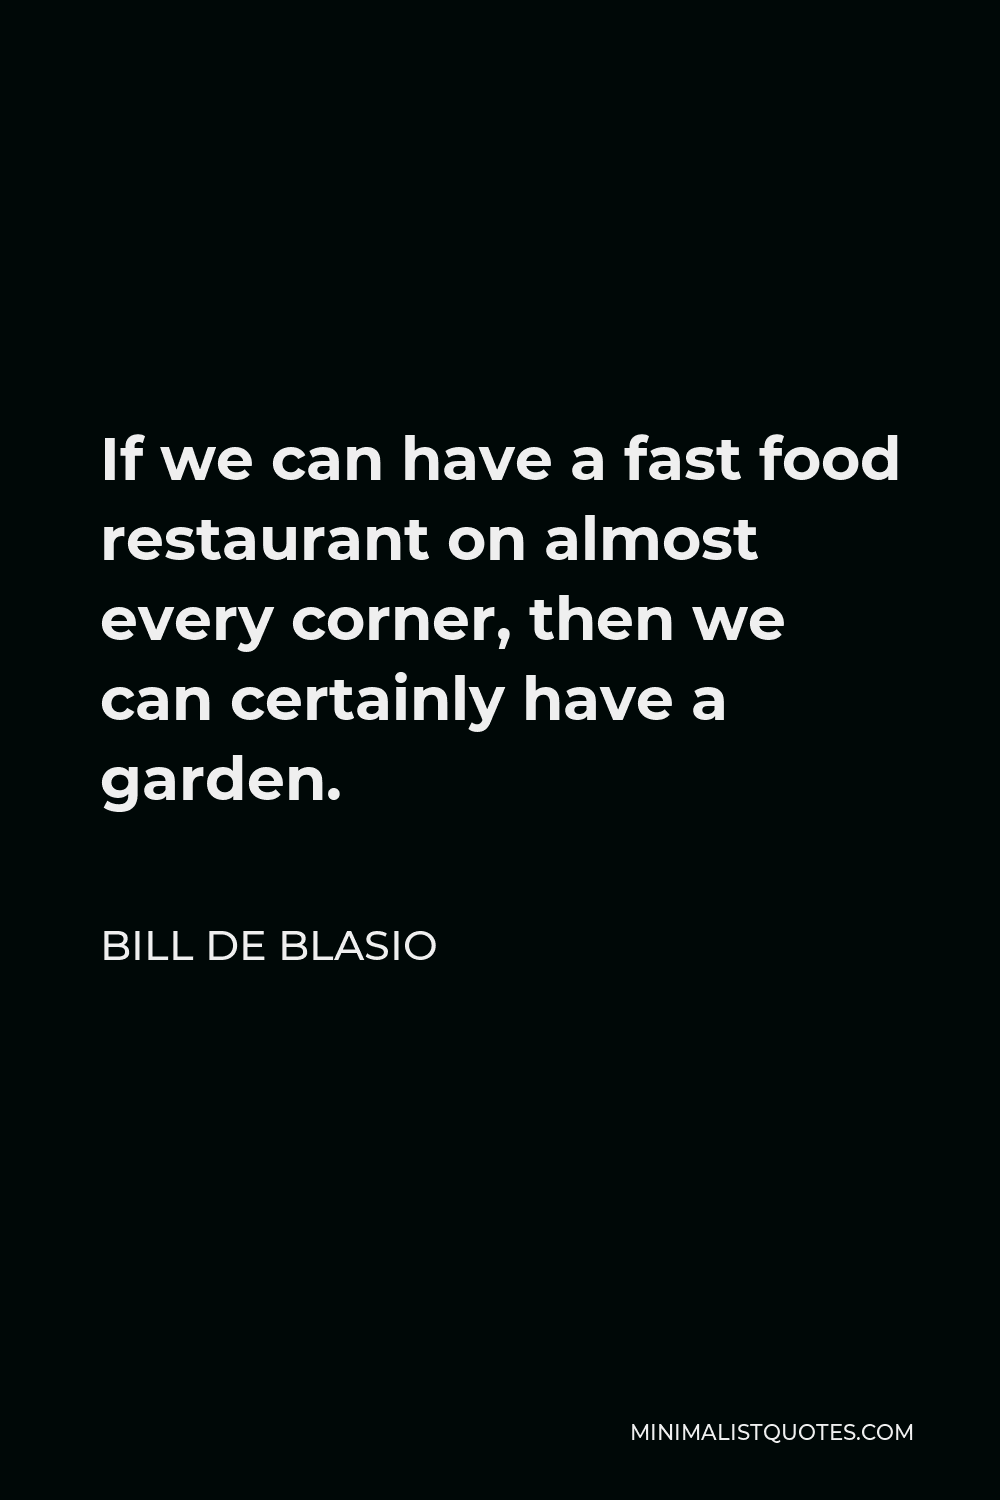 Bill de Blasio Quote - If we can have a fast food restaurant on almost every corner, then we can certainly have a garden.